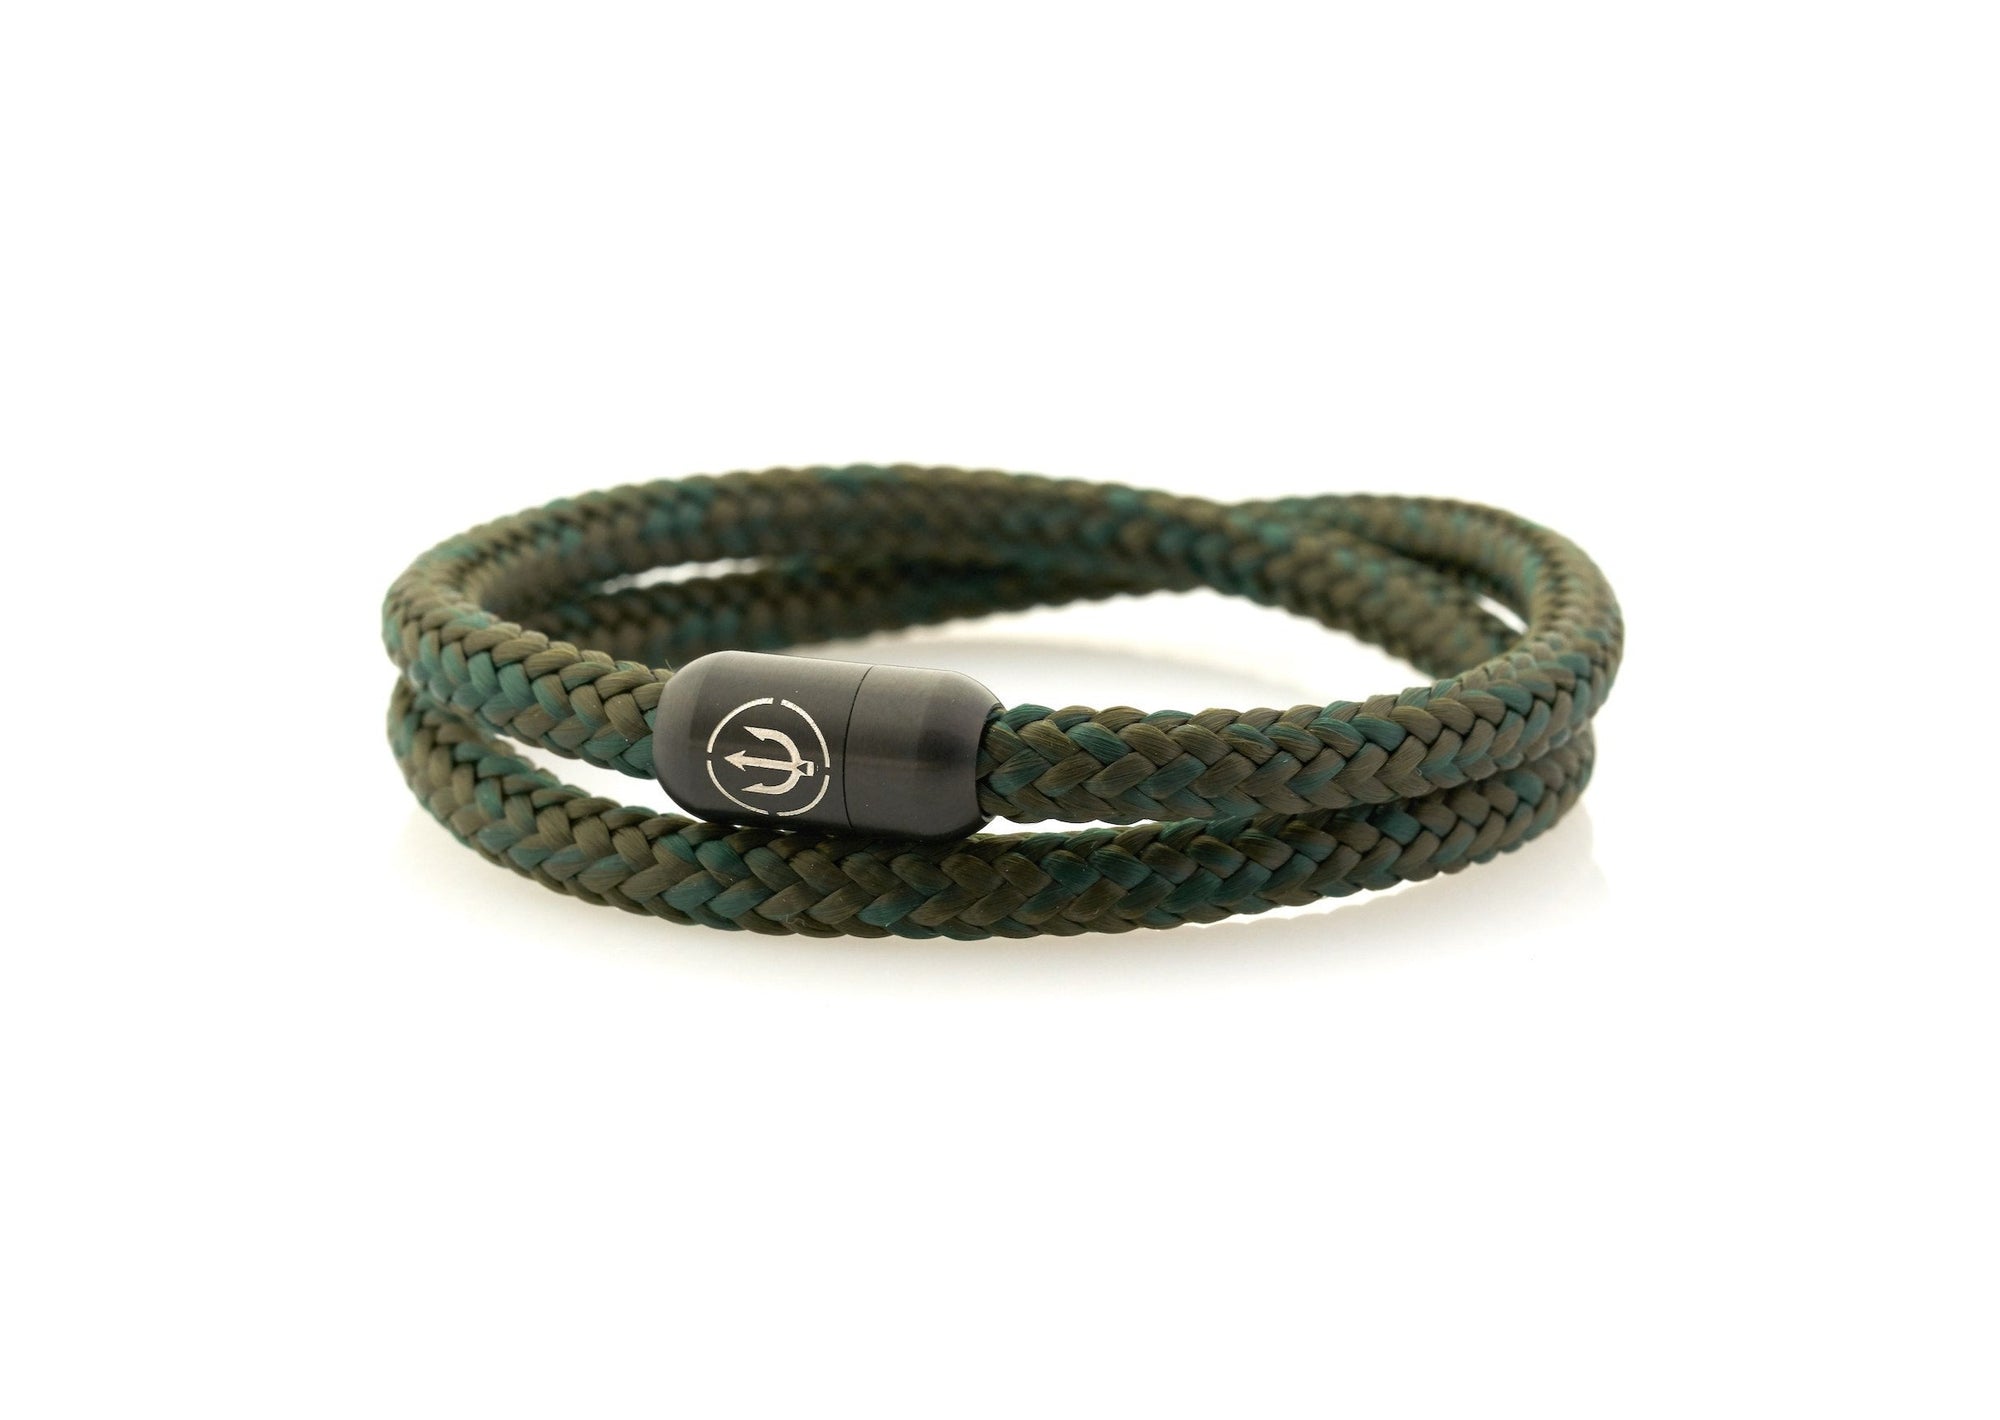 neptn boatswain bracelet with black trident magnetic clasp and seagrass kelp rope